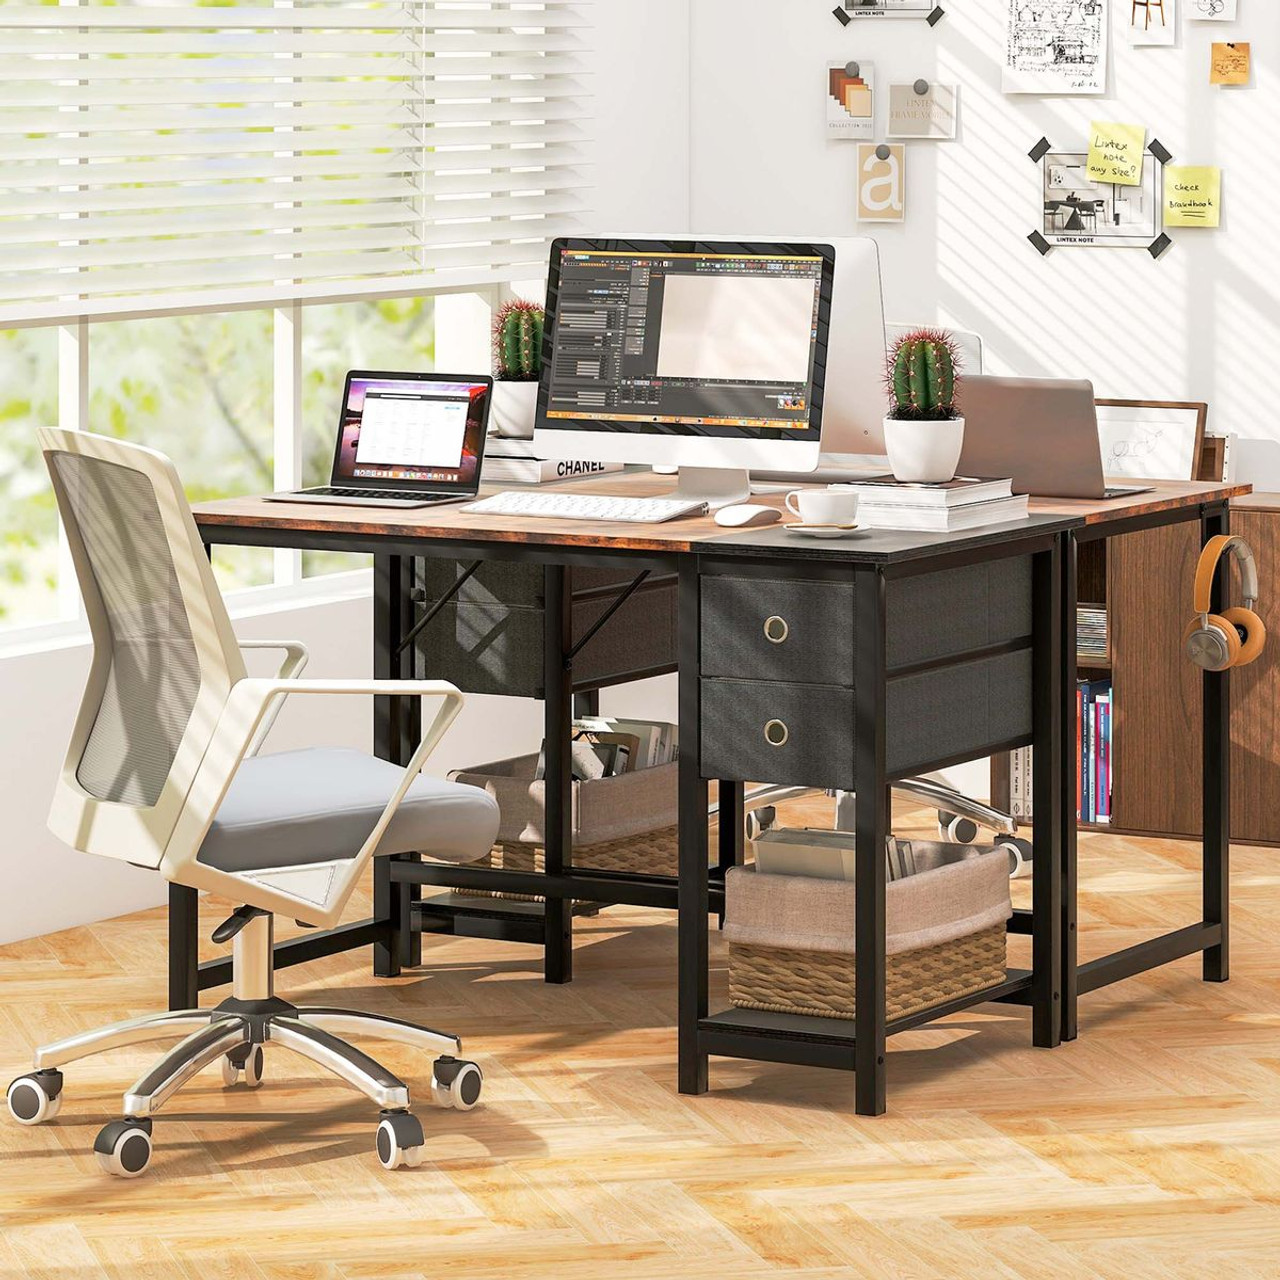 Costway 48" Home Office Desk with Storage and Headphone Hook product image